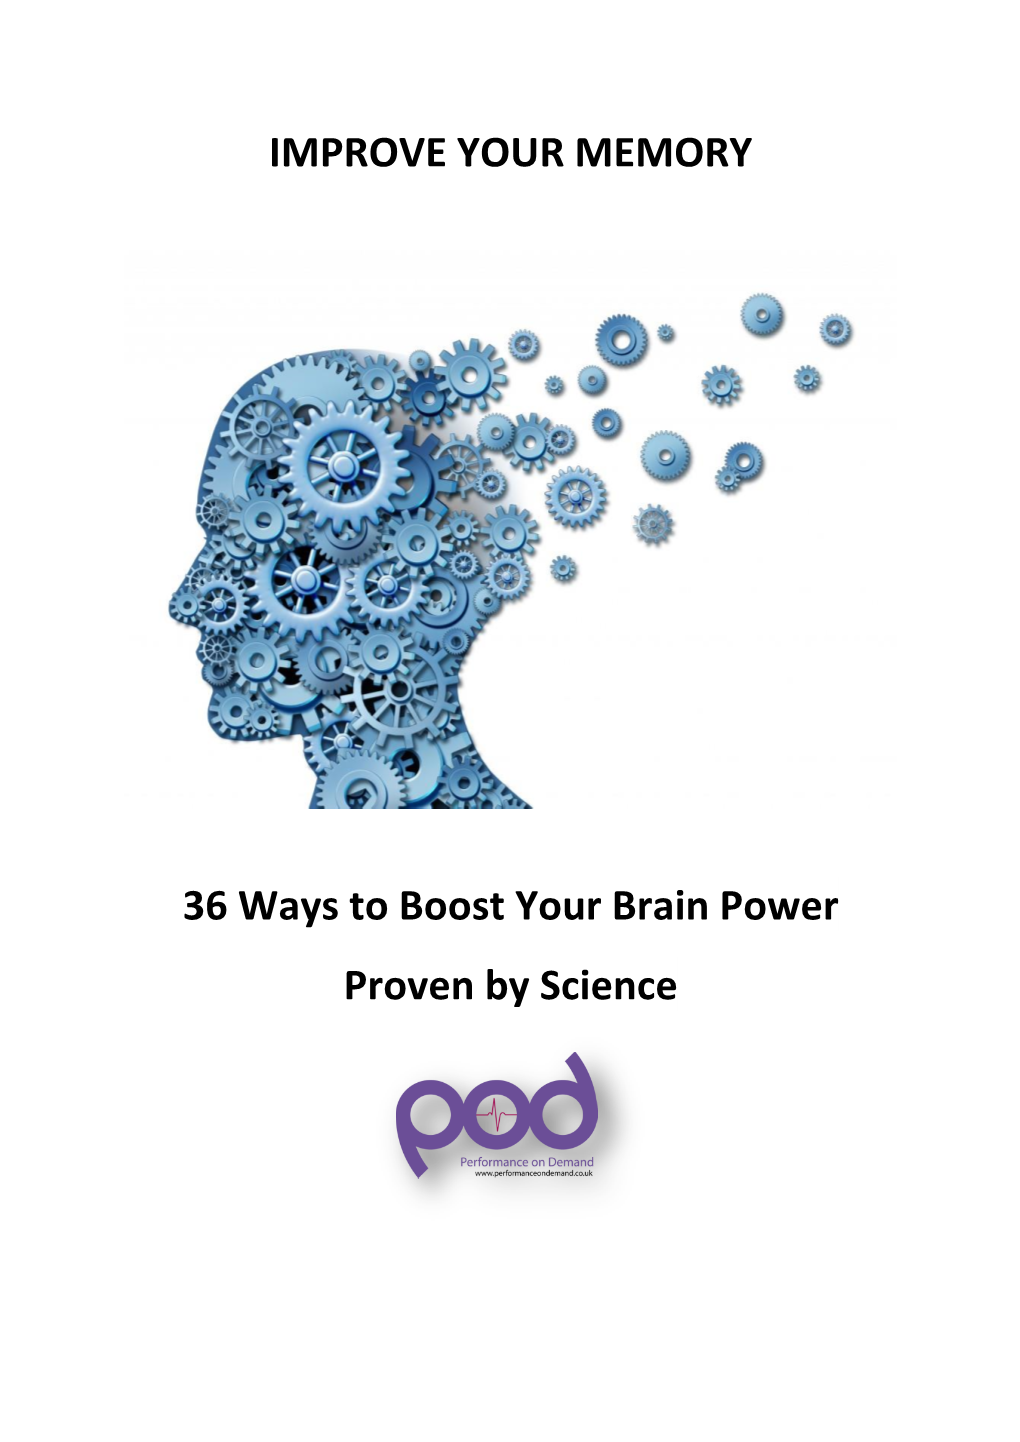 IMPROVE YOUR MEMORY 36 Ways to Boost Your Brain Power Proven